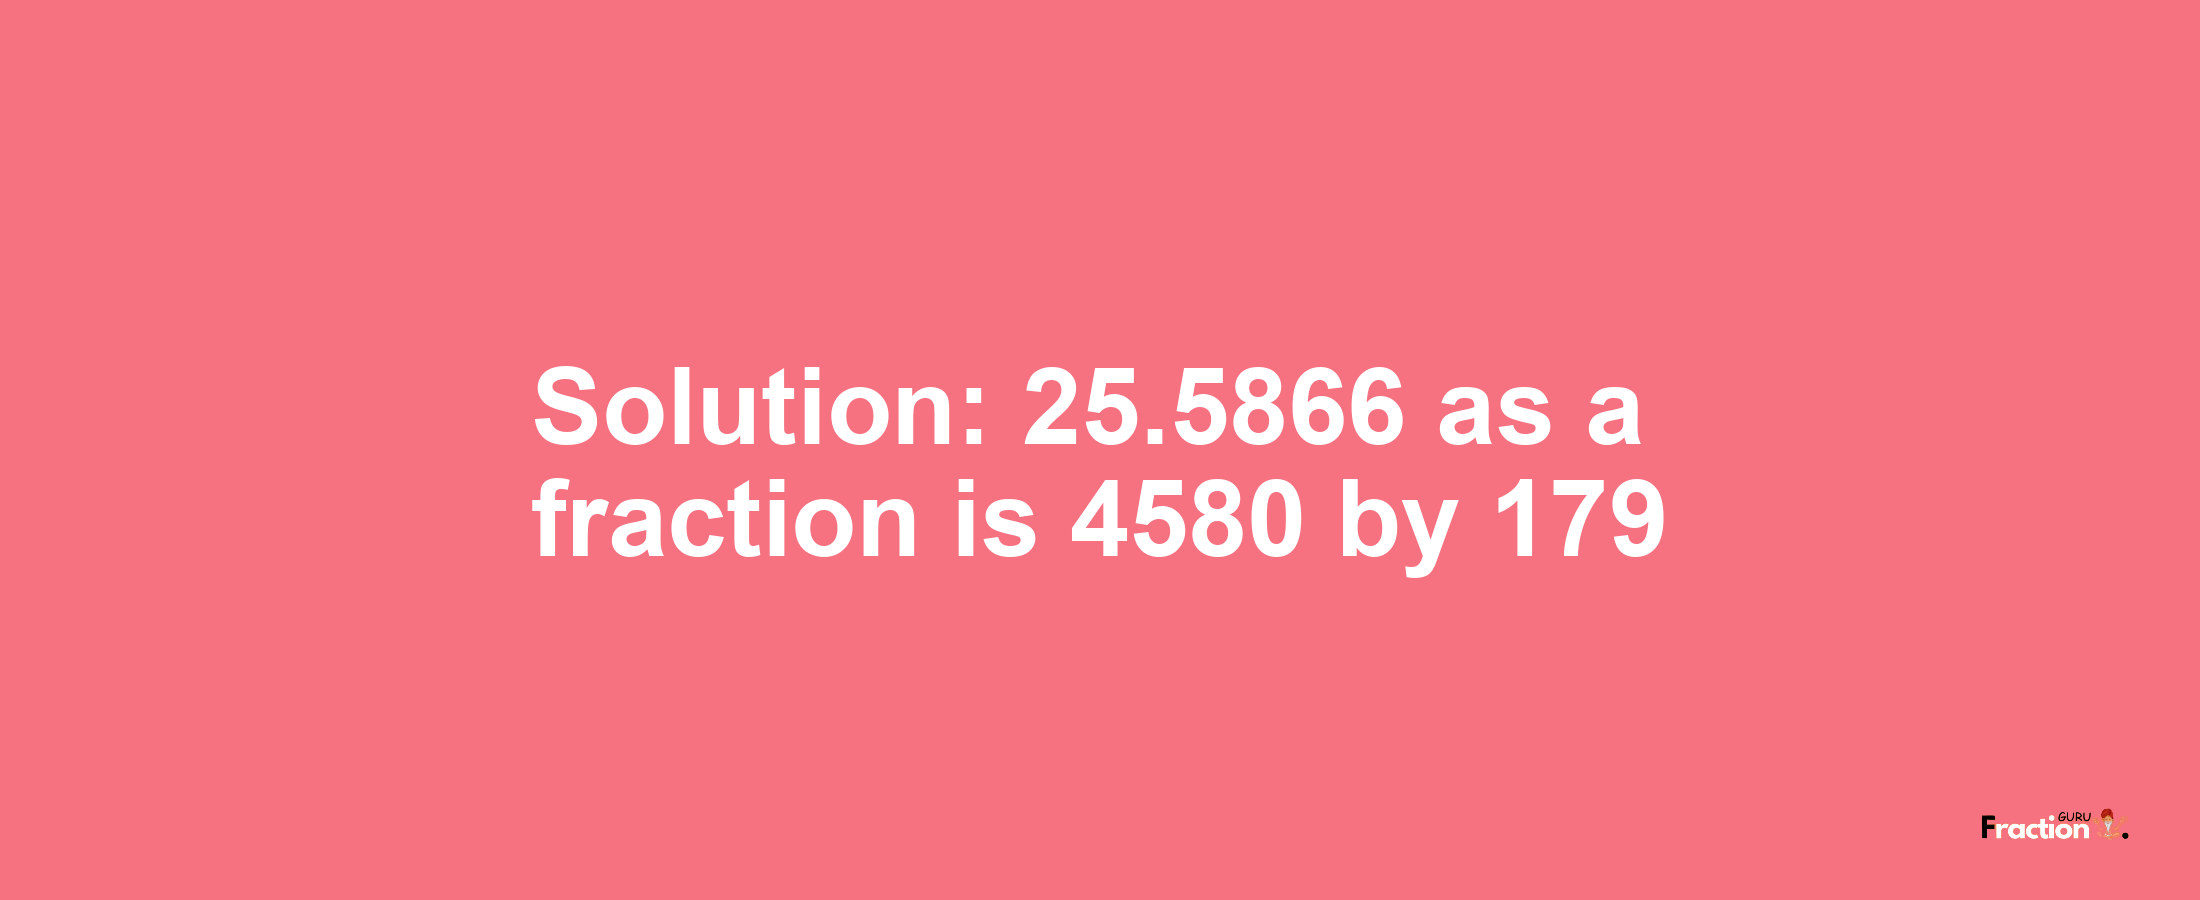 Solution:25.5866 as a fraction is 4580/179